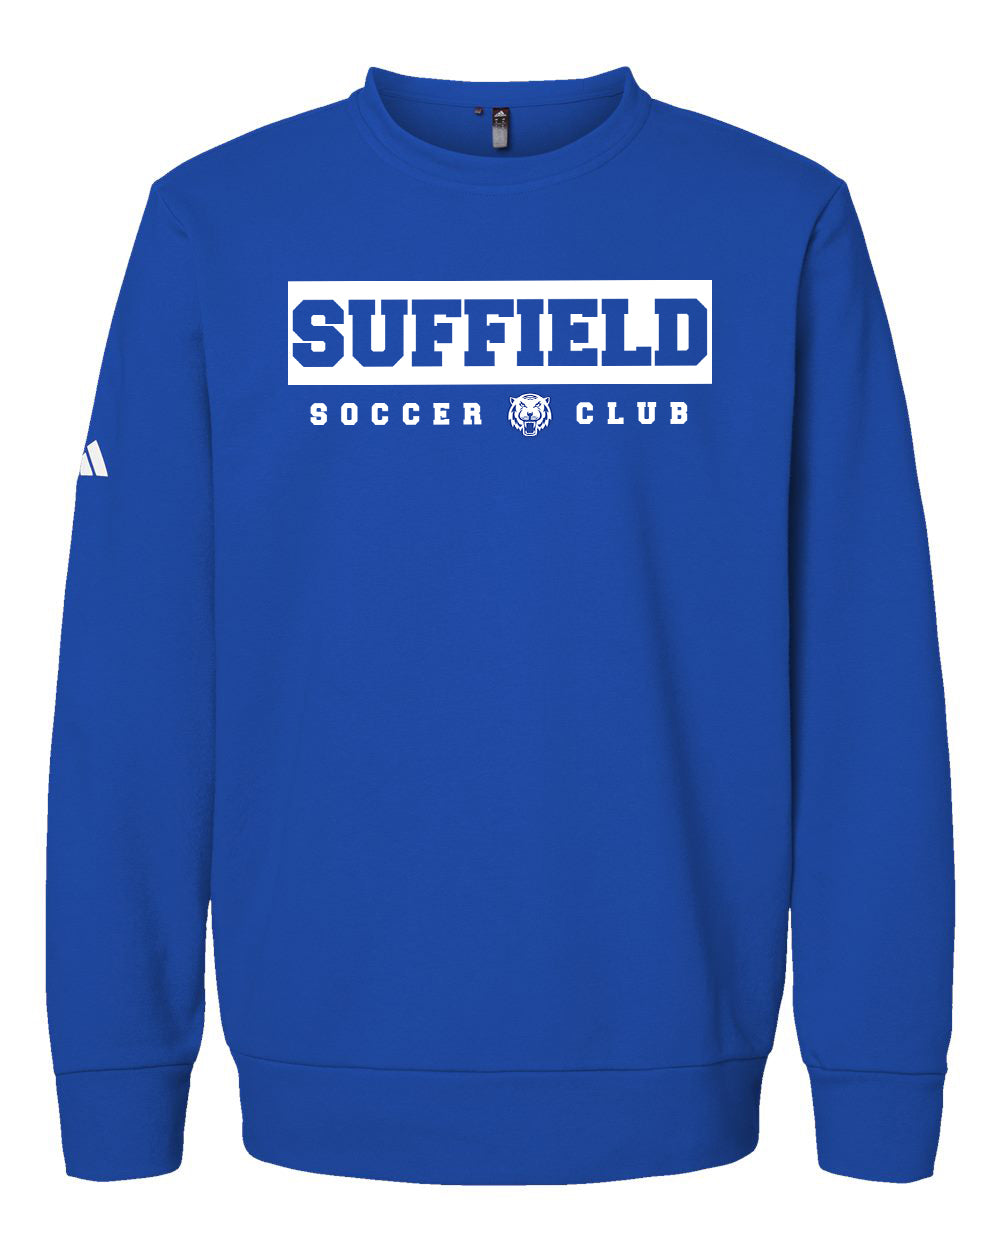 Suffield Soccer Club Adult Adidas Crewneck "Rectangle" - A434 (color options available)